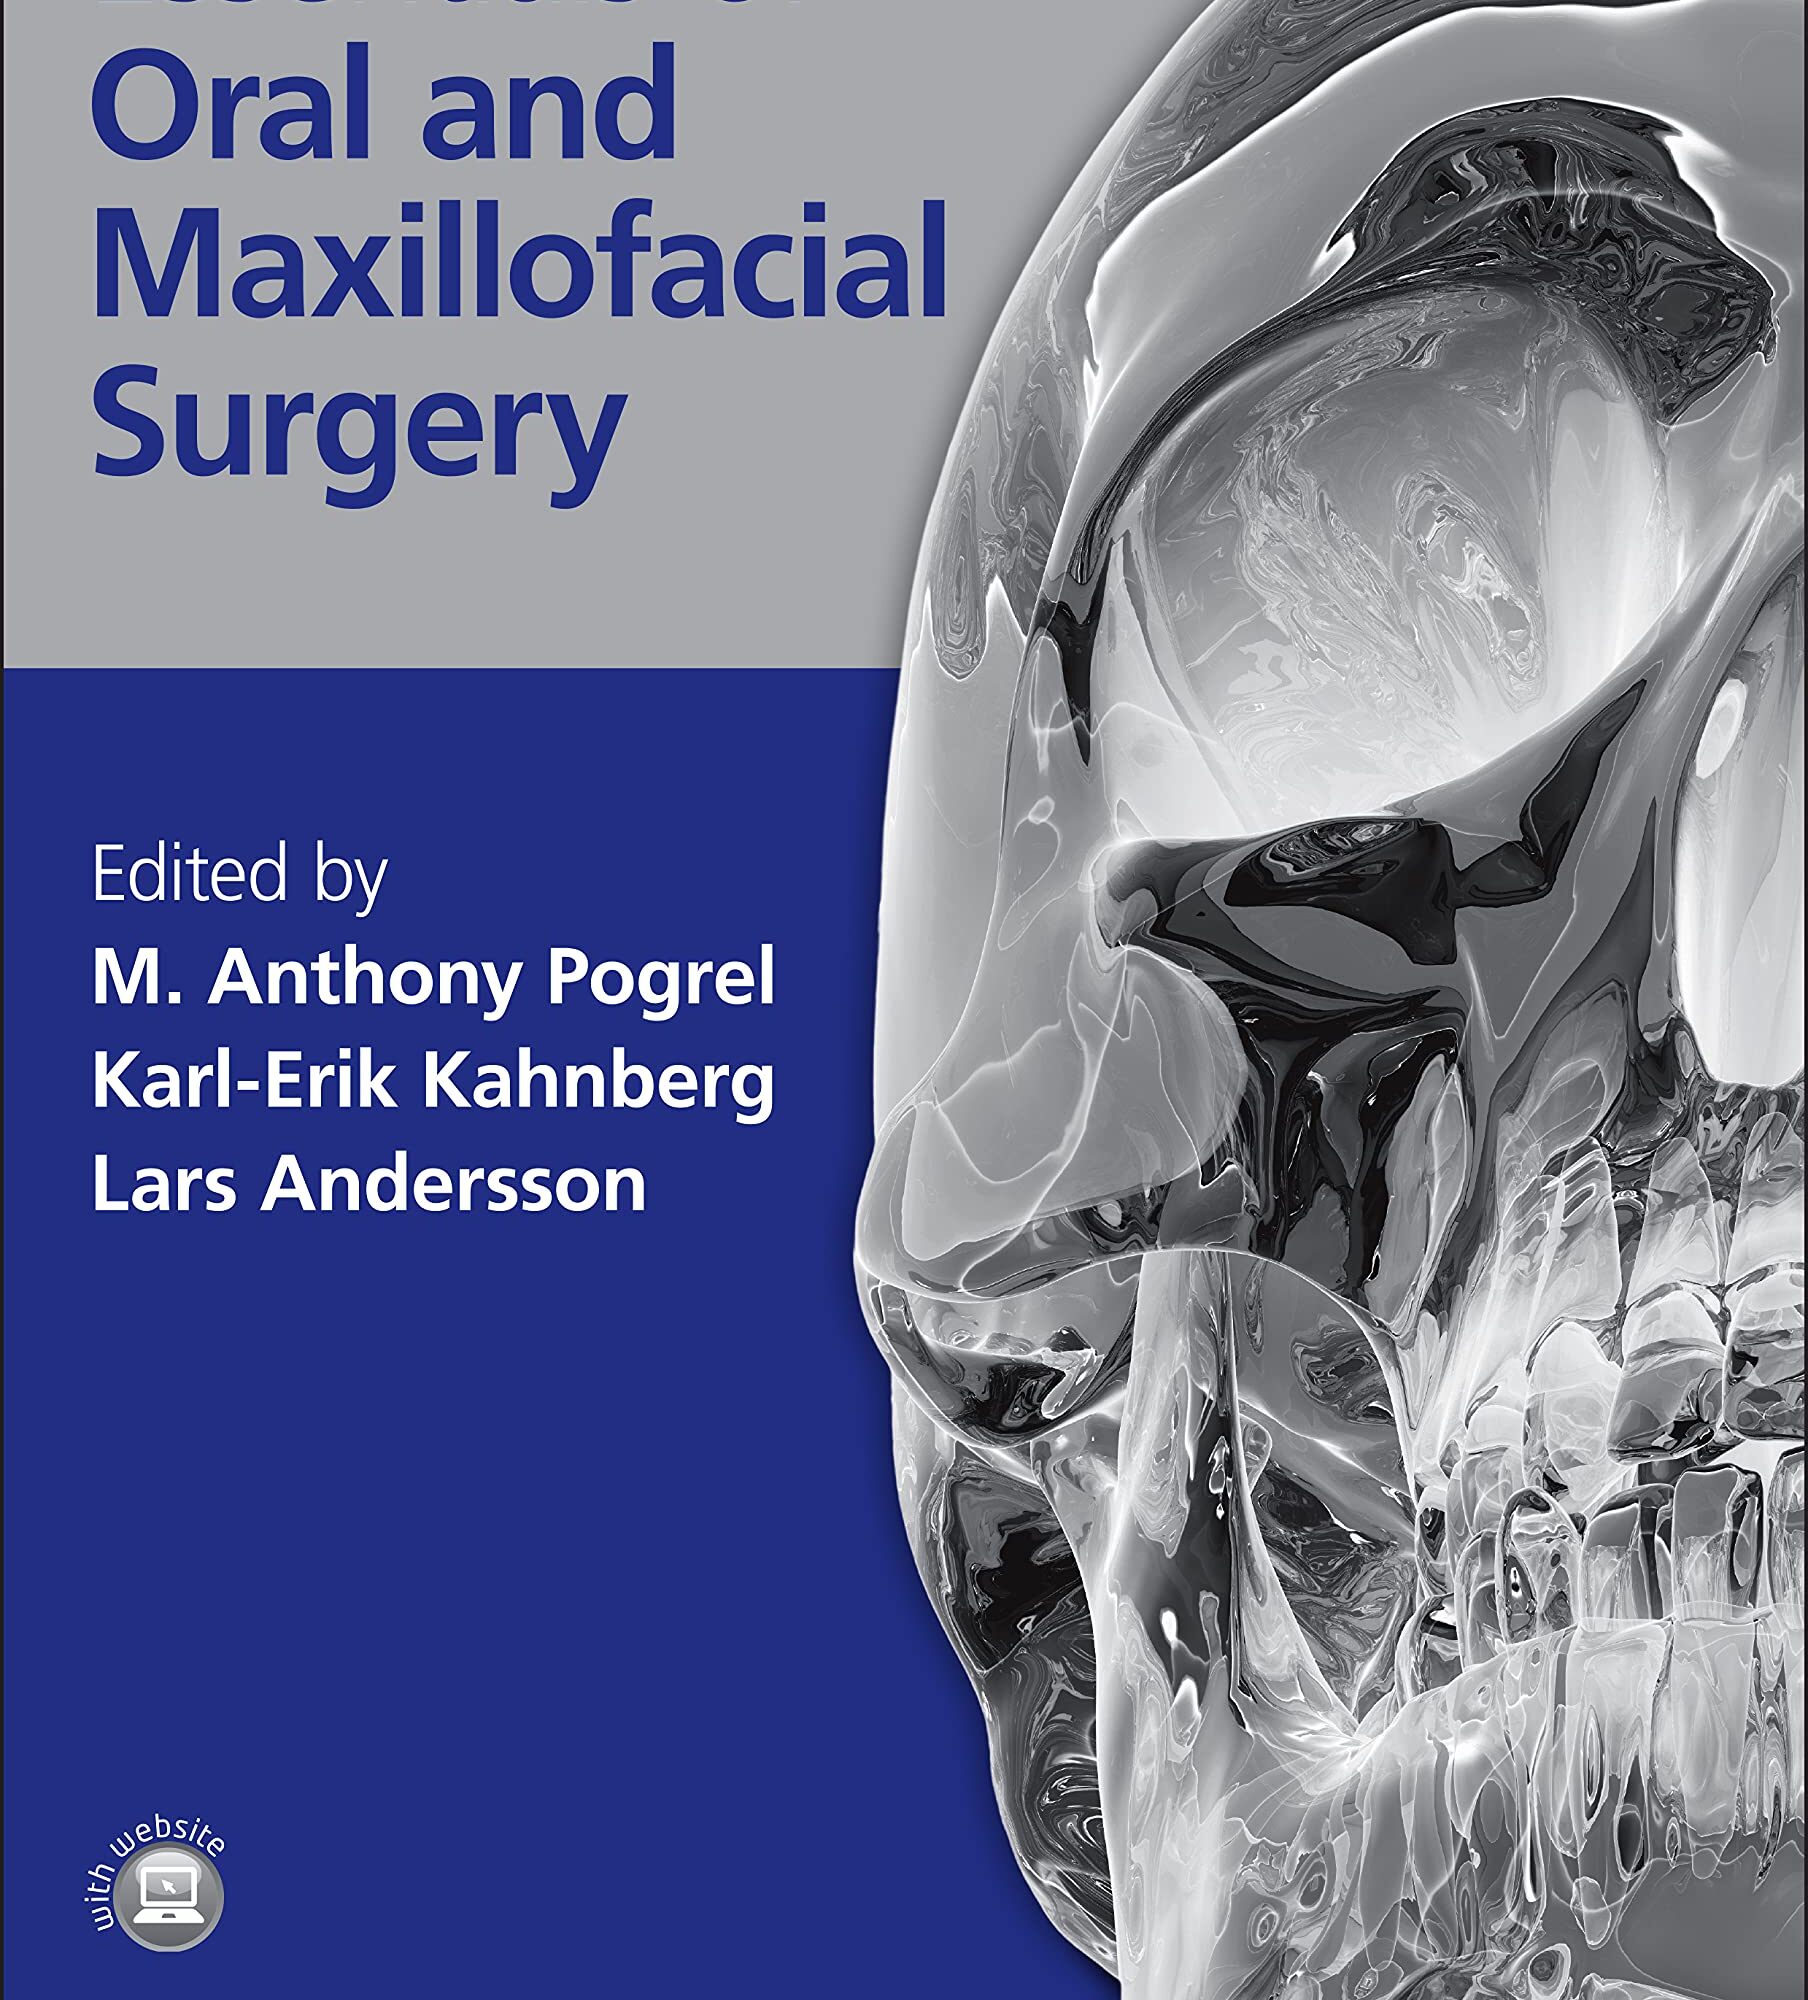 Essentials of Oral and Maxillofacial Surgery by M. Anthony Pogrel (Editor), Karl-Erik Kahnberg (Editor), Lars Andersson (Editor)